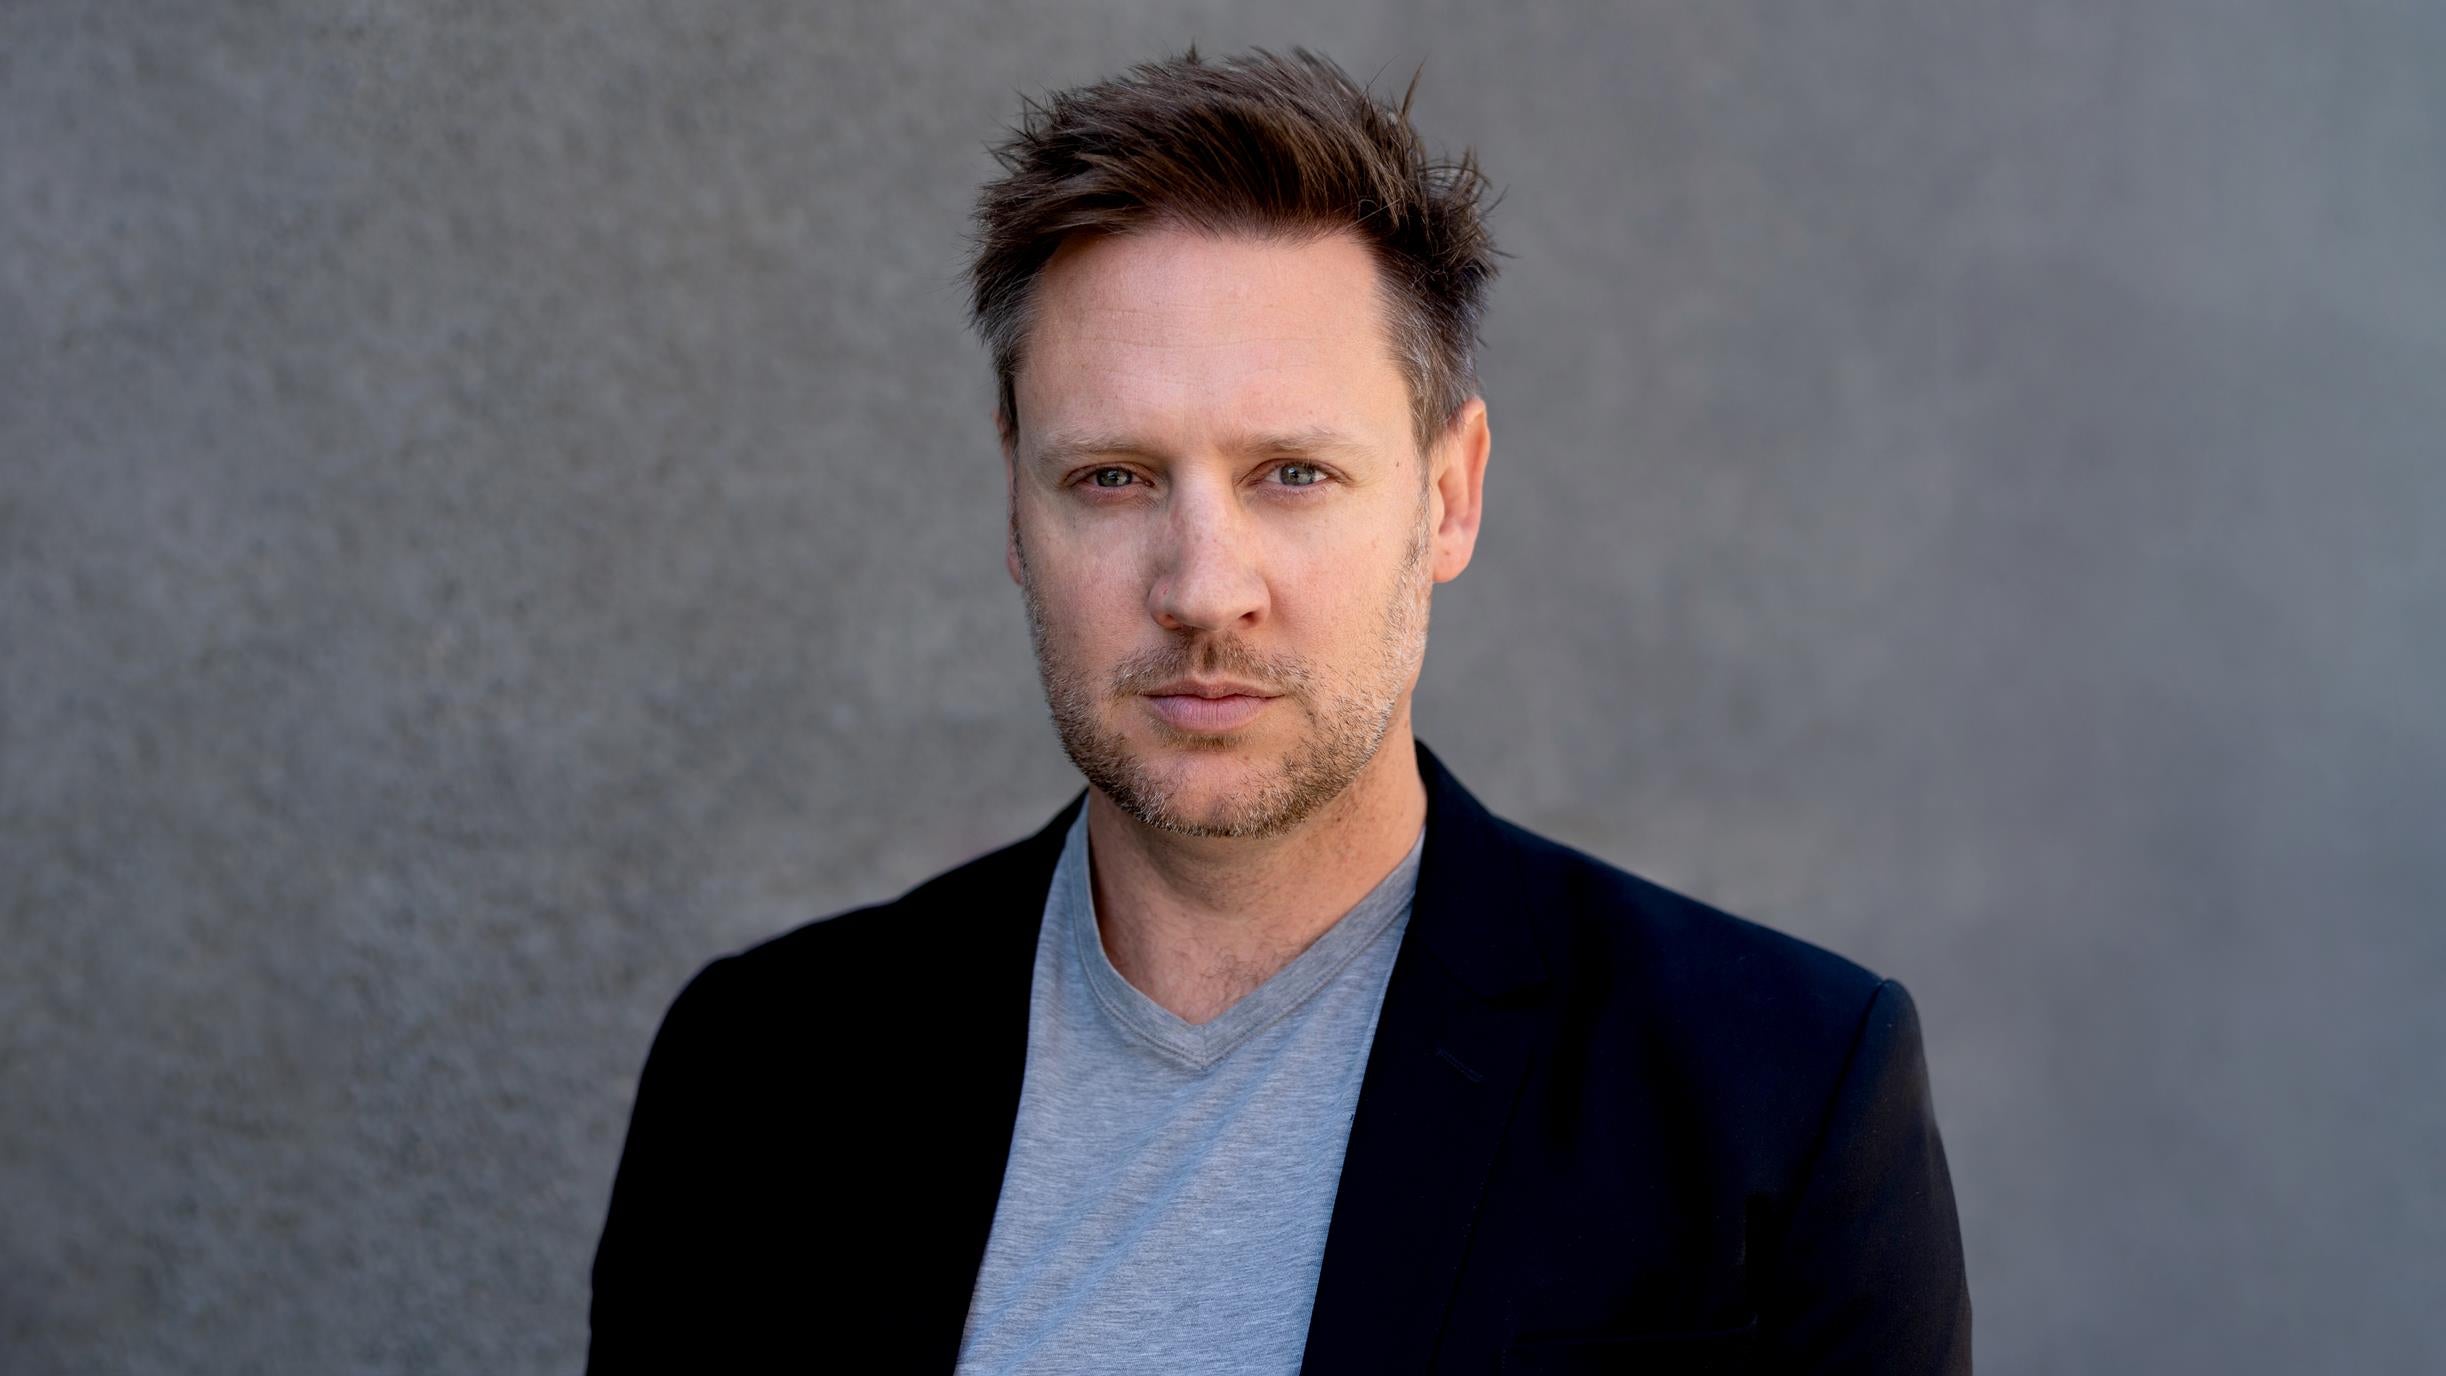 Image for District 9 and Chappie director Neill Blomkamp joins indie studio working on multiplayer shooter